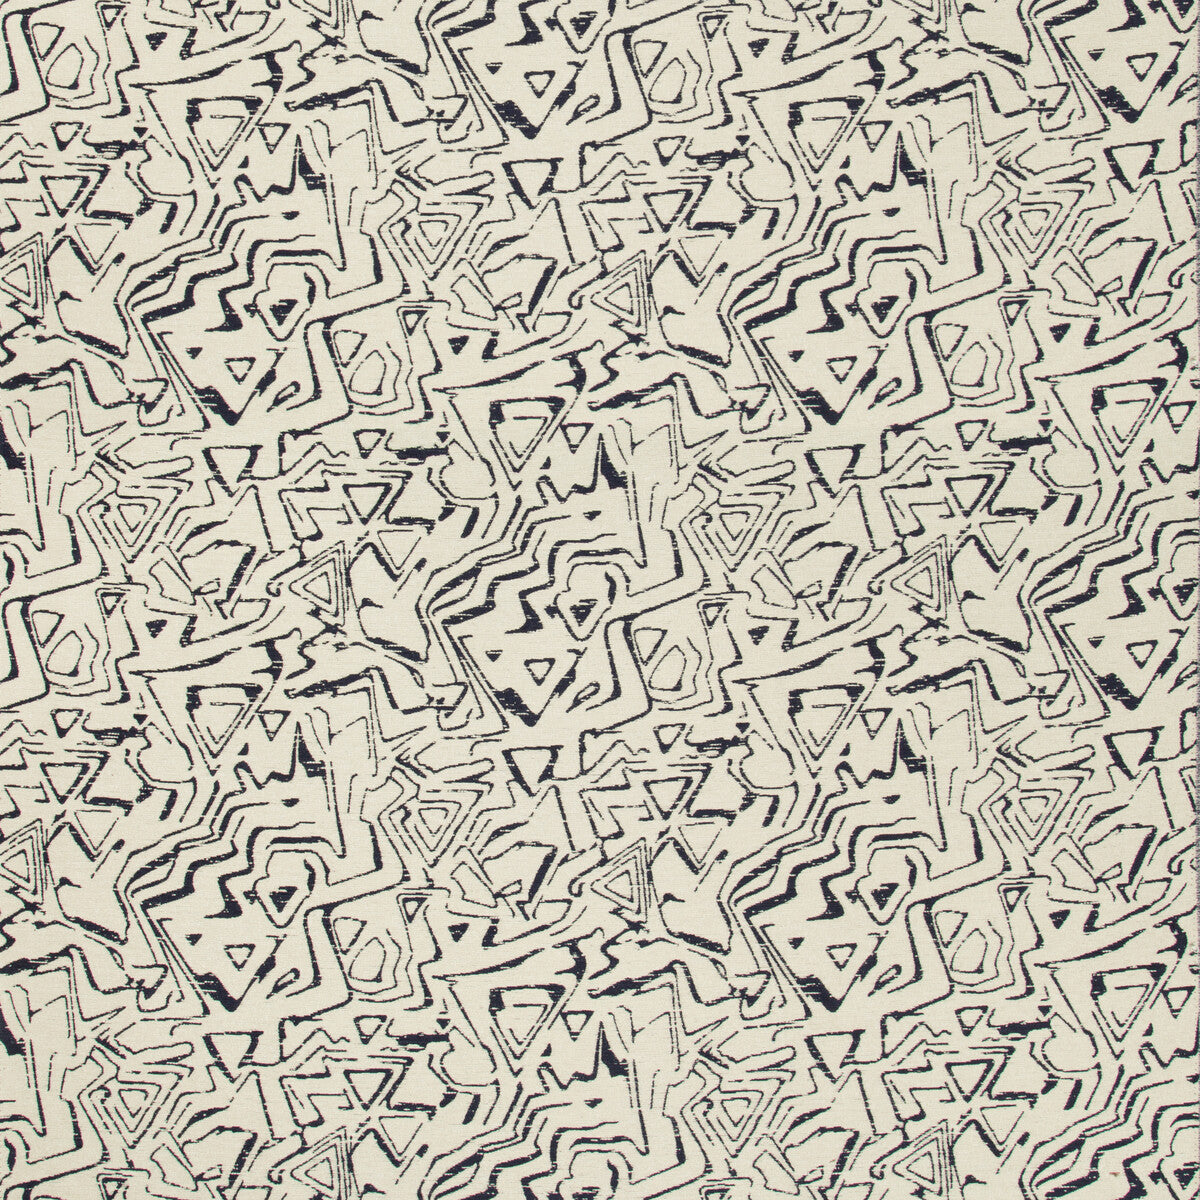 Kravet Design fabric in 34955-50 color - pattern 34955.50.0 - by Kravet Design in the Performance Crypton Home collection